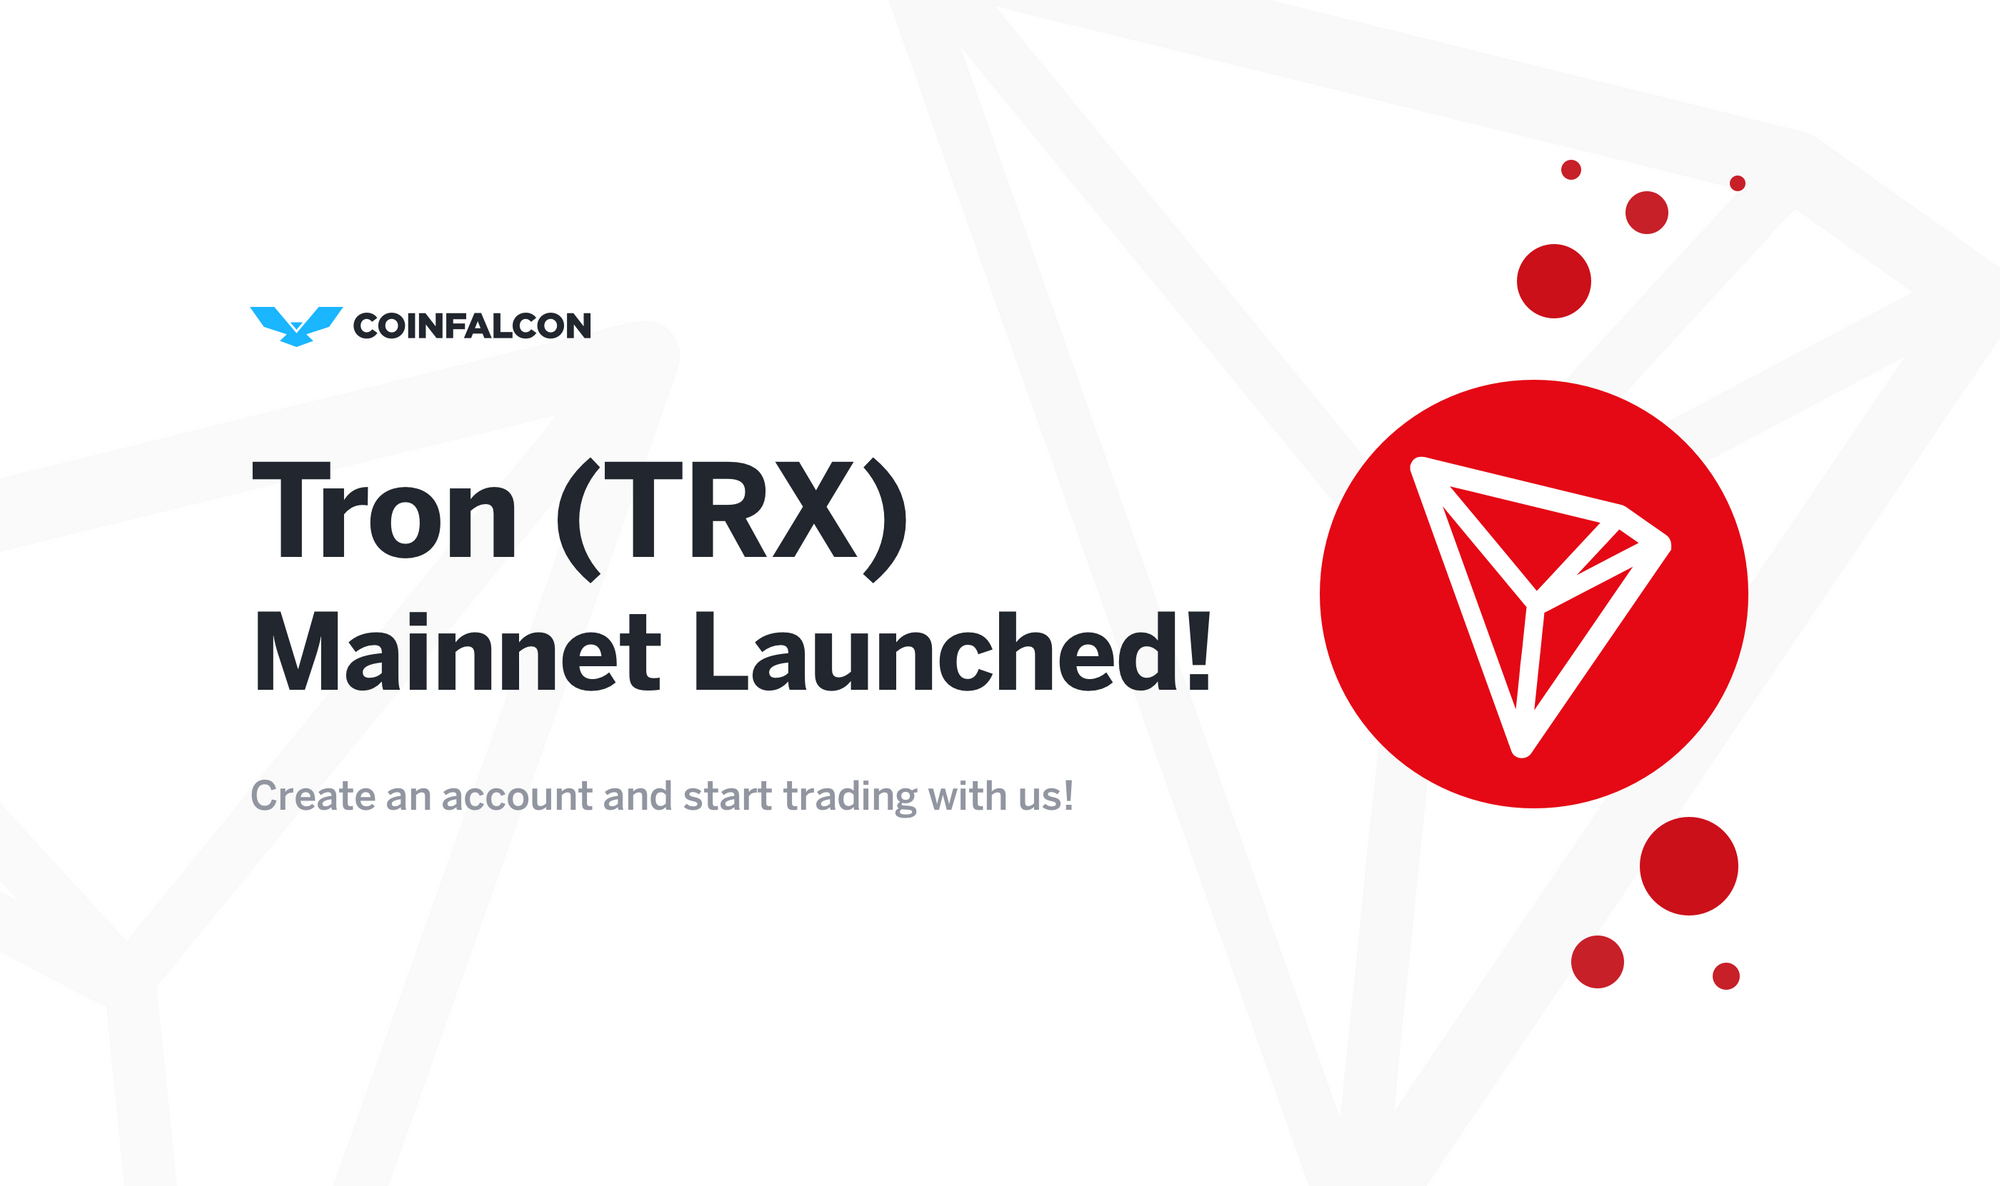 Tron (TRX) Mainnet Launched! Trade TRX on CoinFalcon Today!